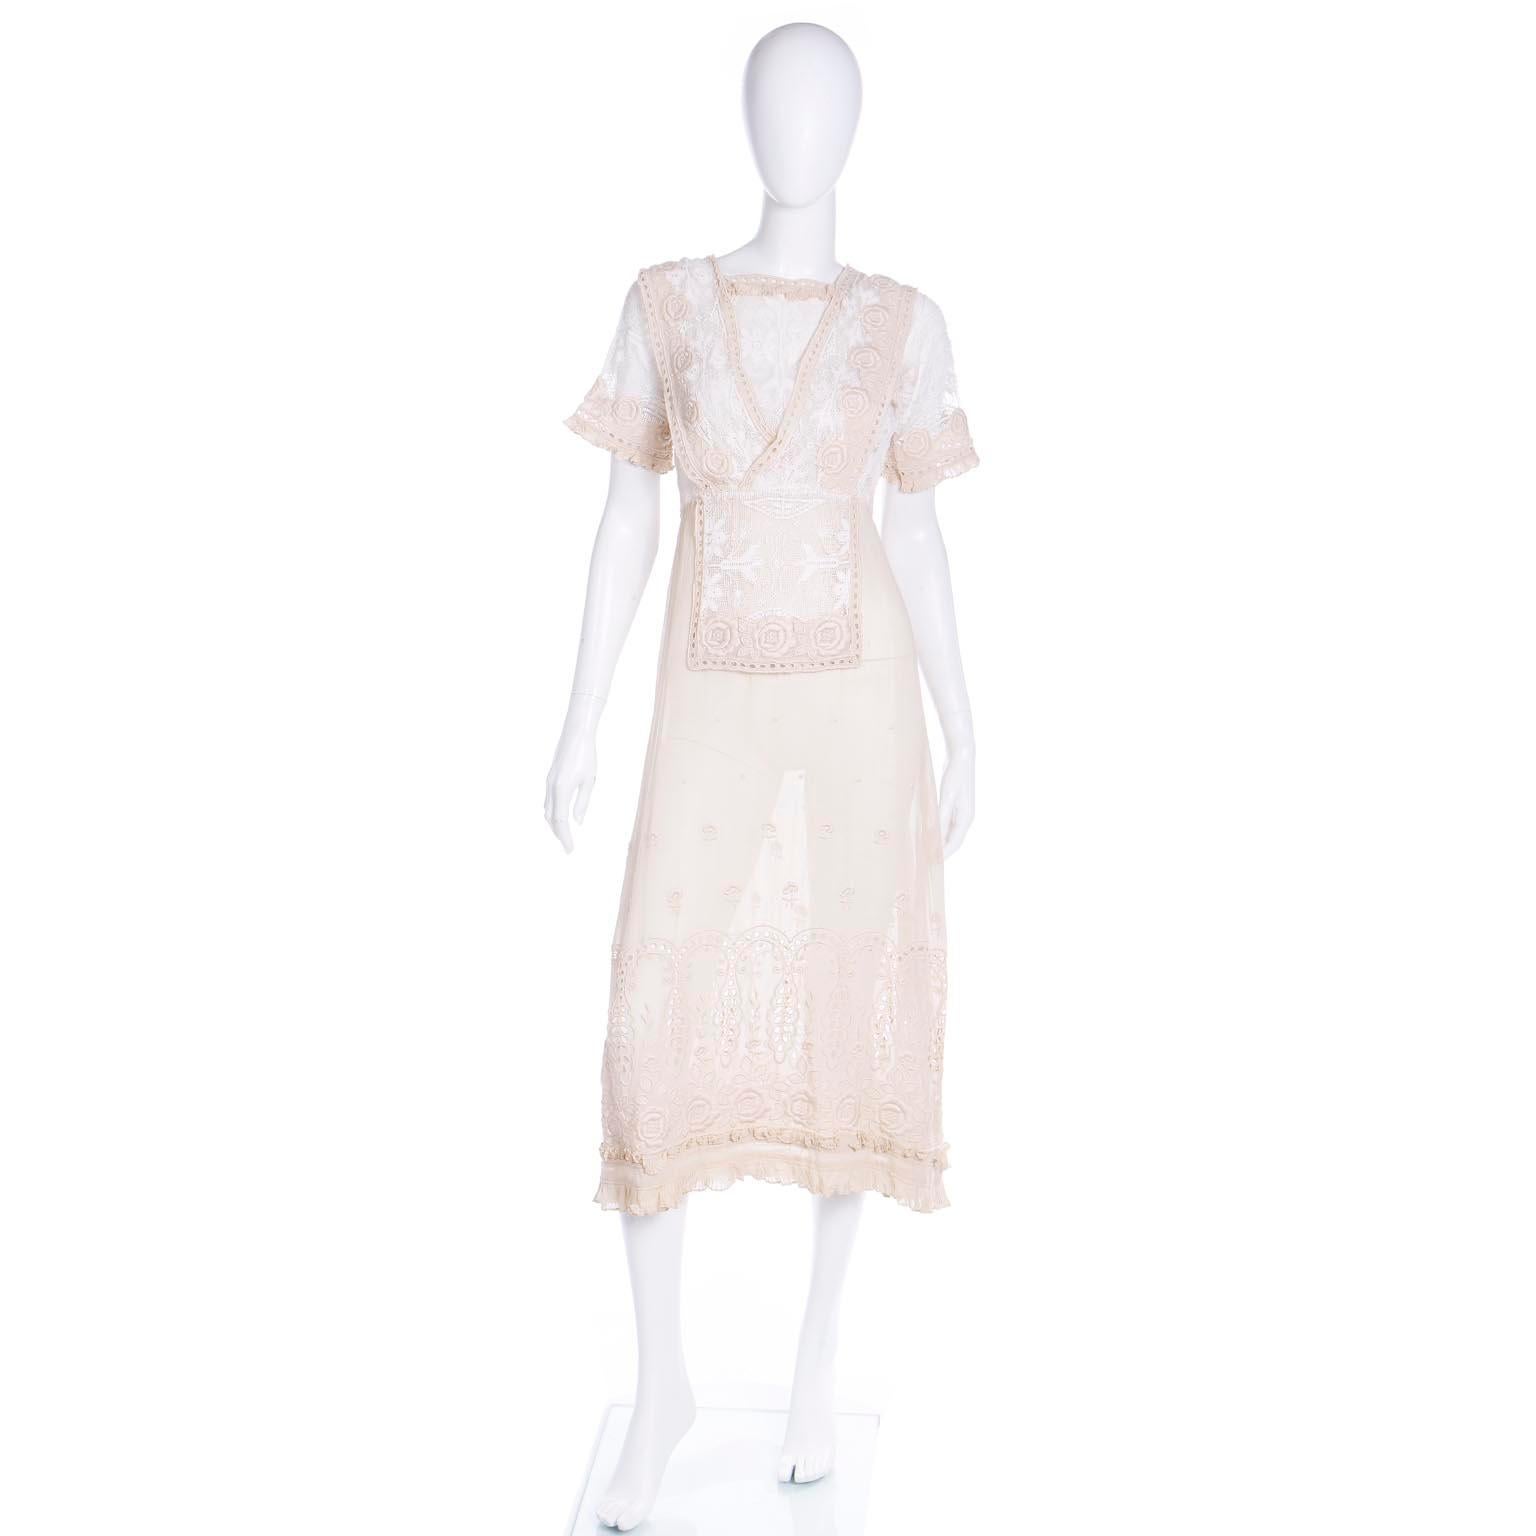 This vintage Edwardian 1910's vintage ivory and cream day dress has incredible floral embroidery, cutwork and lace! The roses on this dress are so lovely and there is a double layer on the bodice with hooks and eyes in the back with so many other